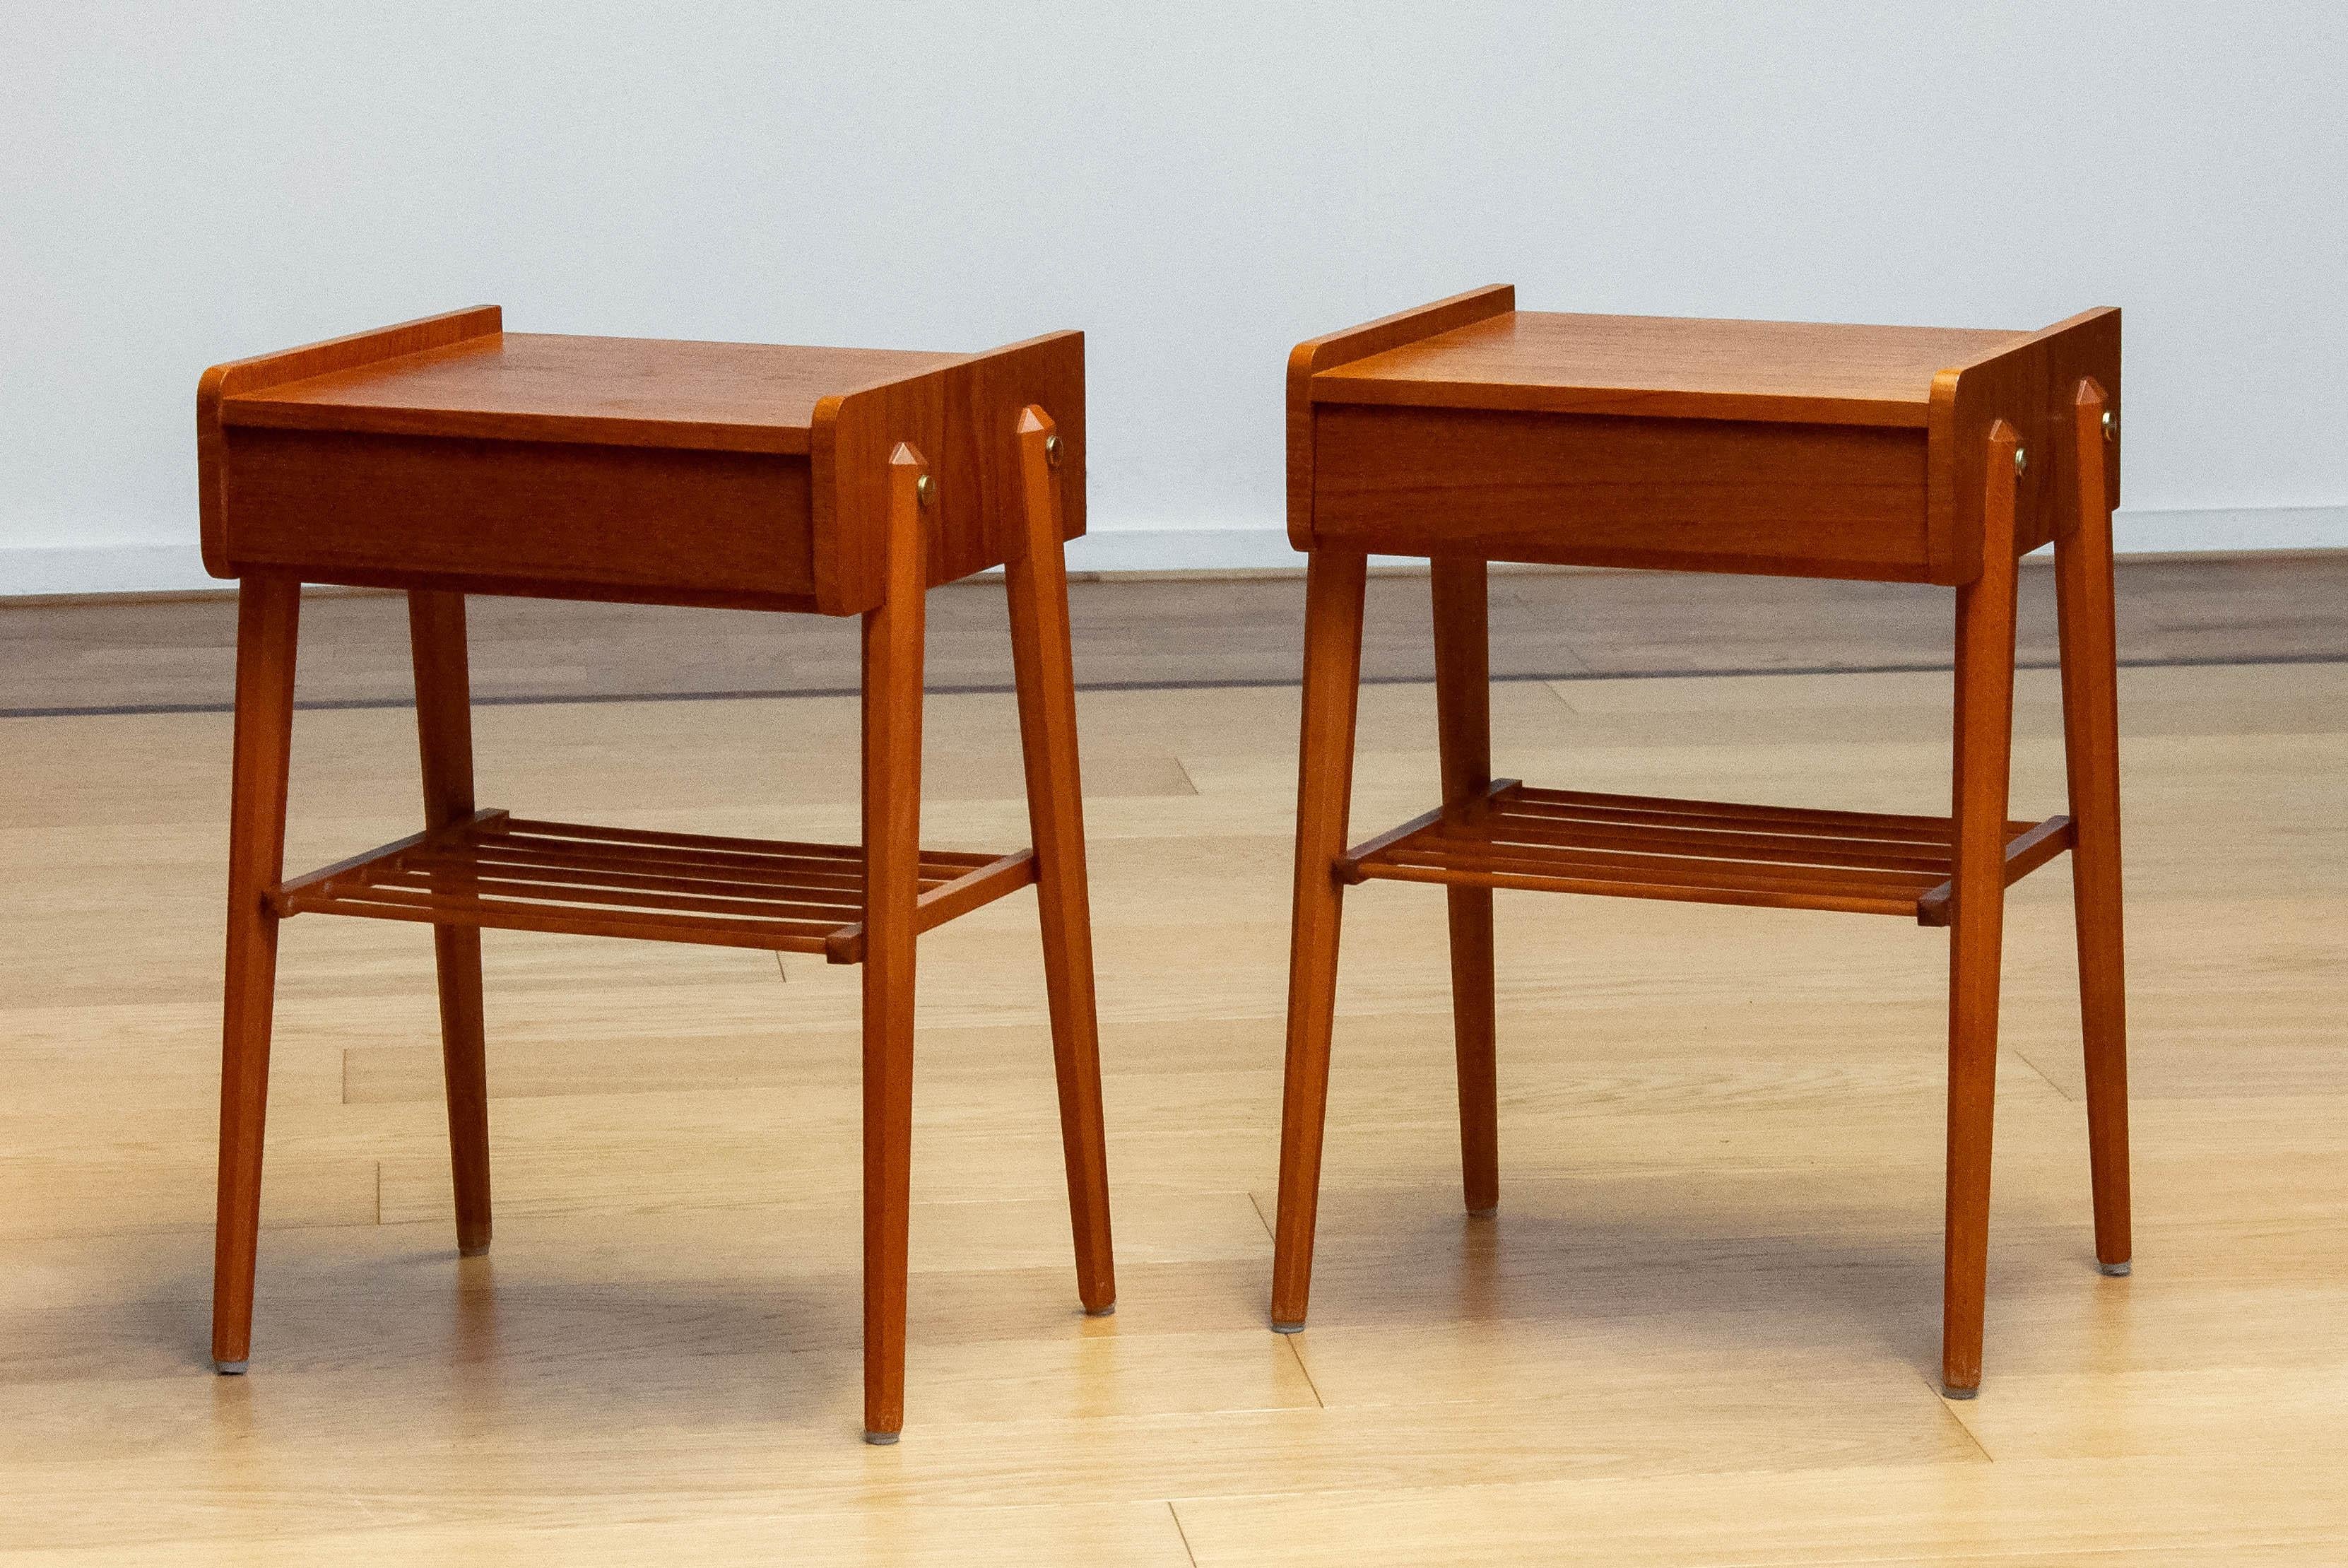 1950s Pair Swedish Night Stands / Bed side Tables By AB Bjärni Made Of Teak 6